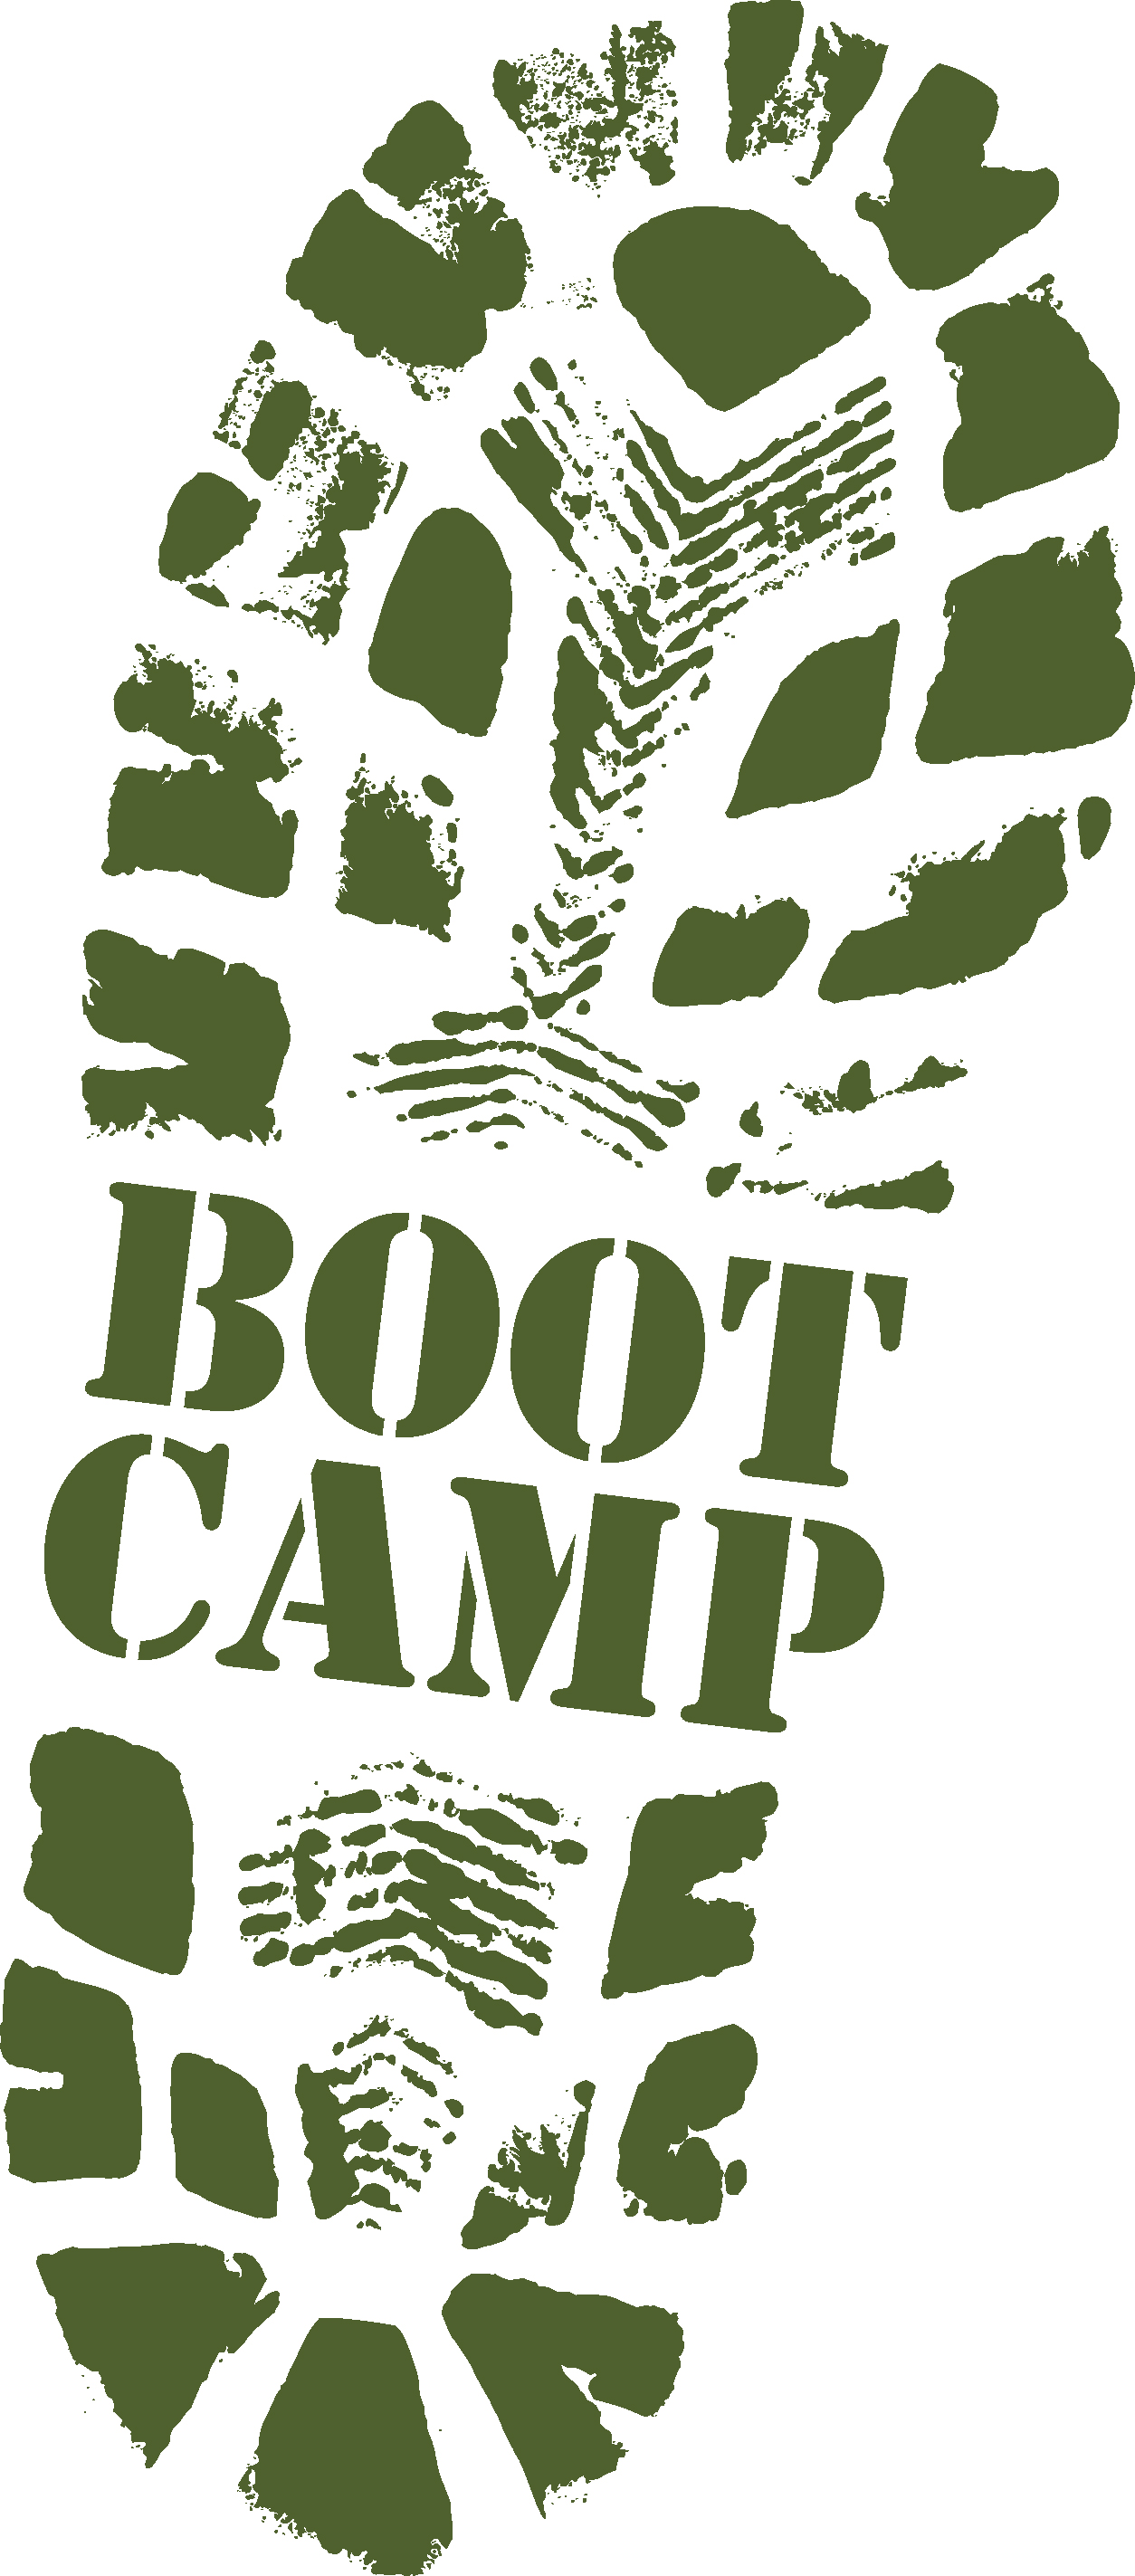 Total Bootcamp image